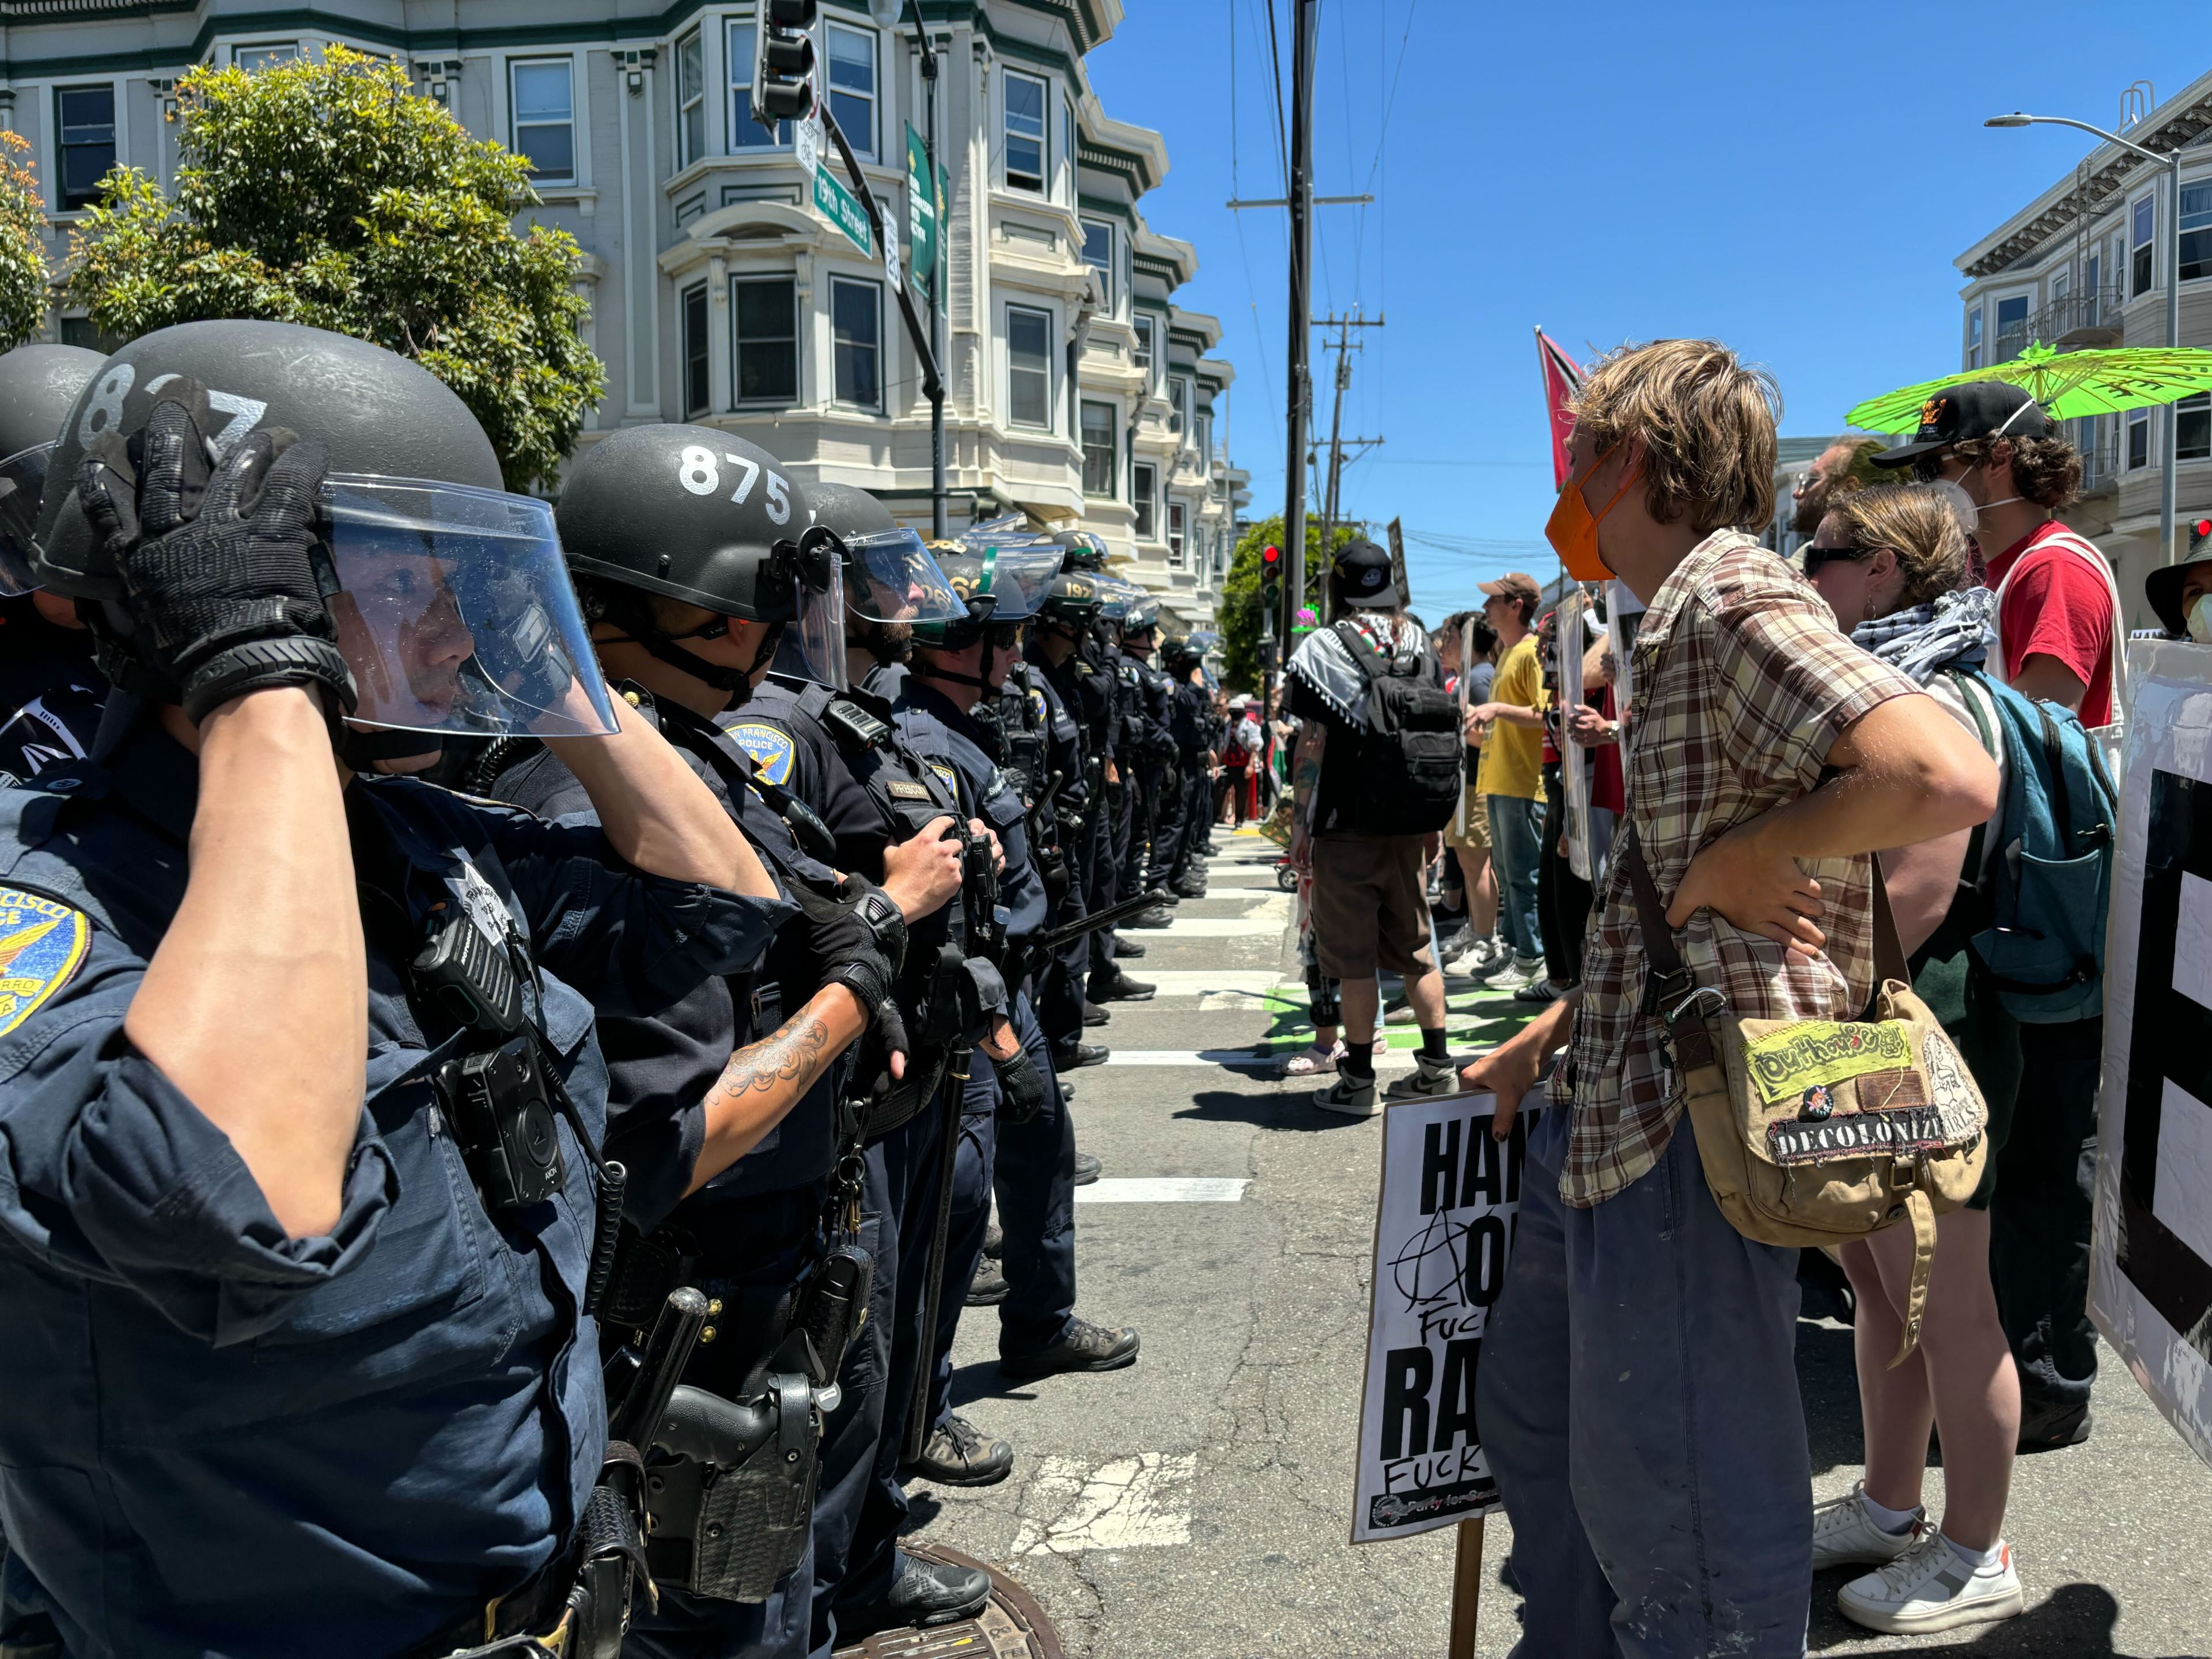 A line of police officers in riot gear face off against protesters in a city street. The scene includes both officers and civilians holding signs in an urban setting.